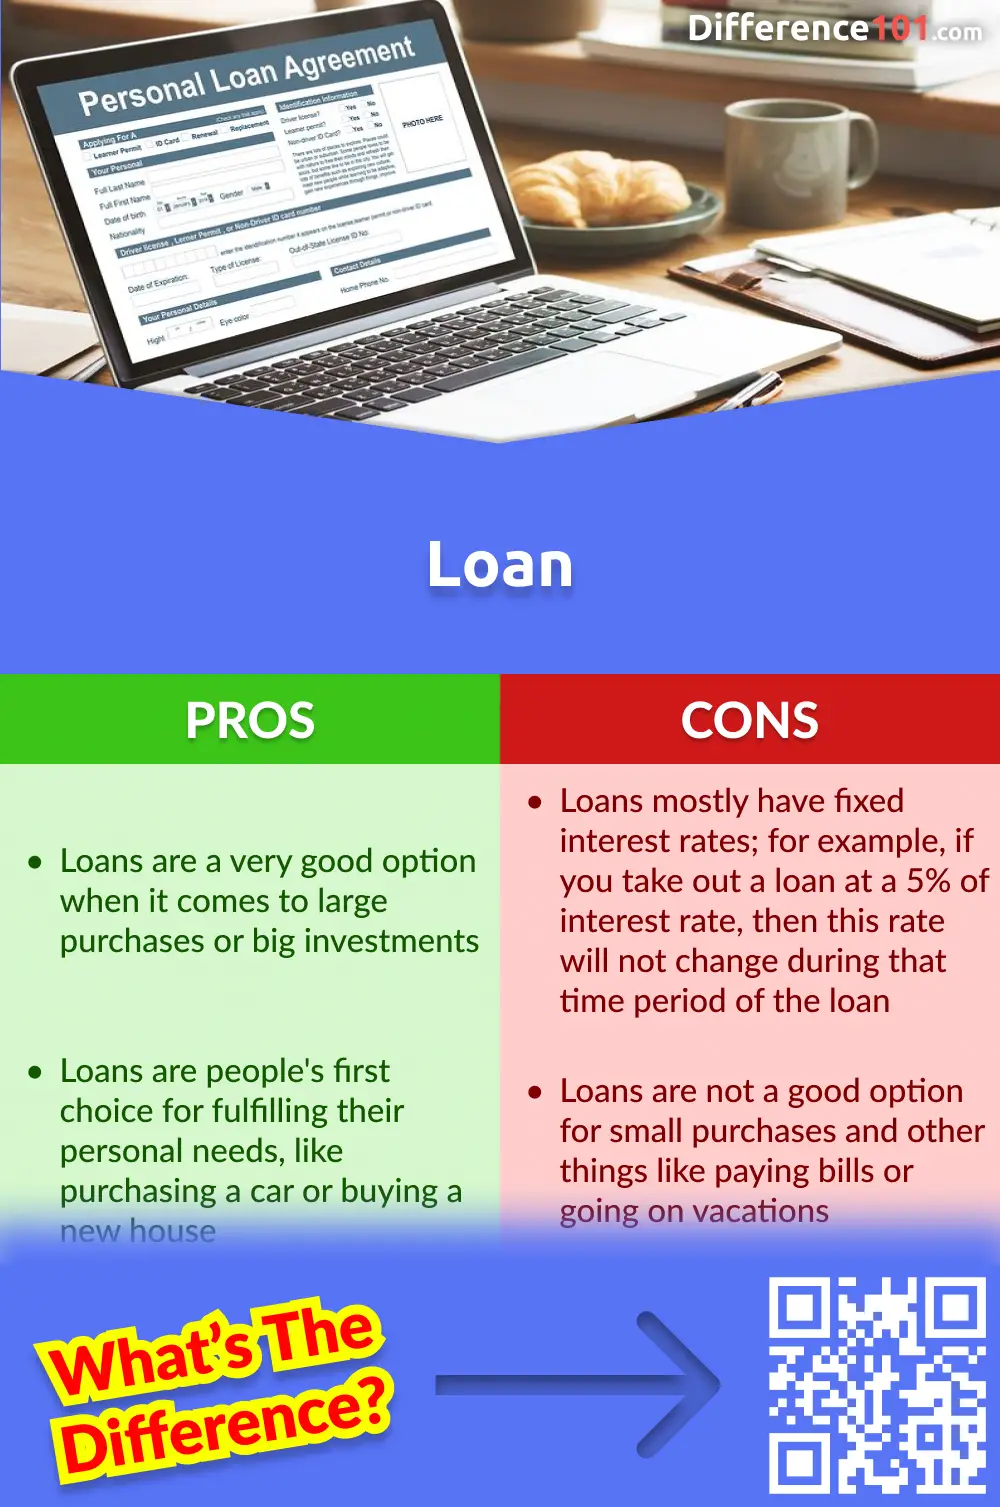 Loan Pros and Cons
